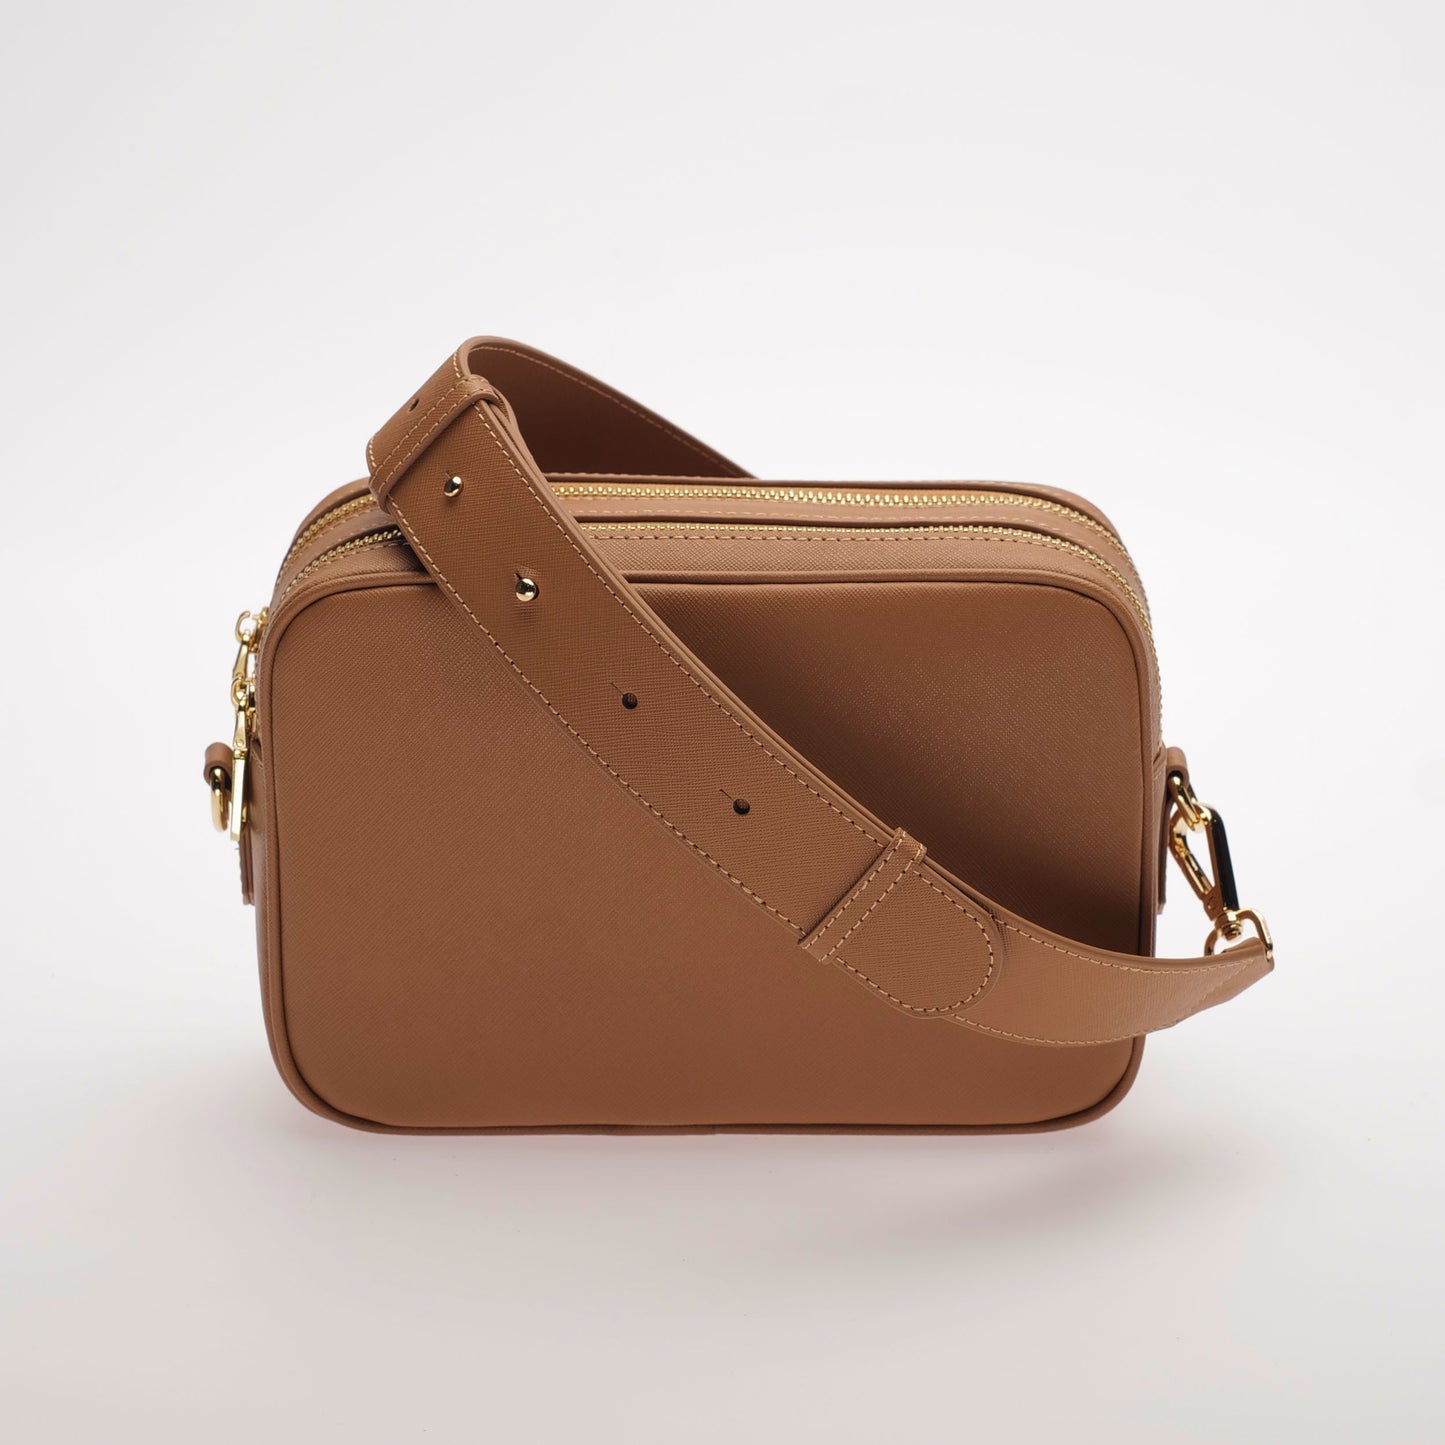 The James Saffiano Leather Crossbody Bag by Swoon London